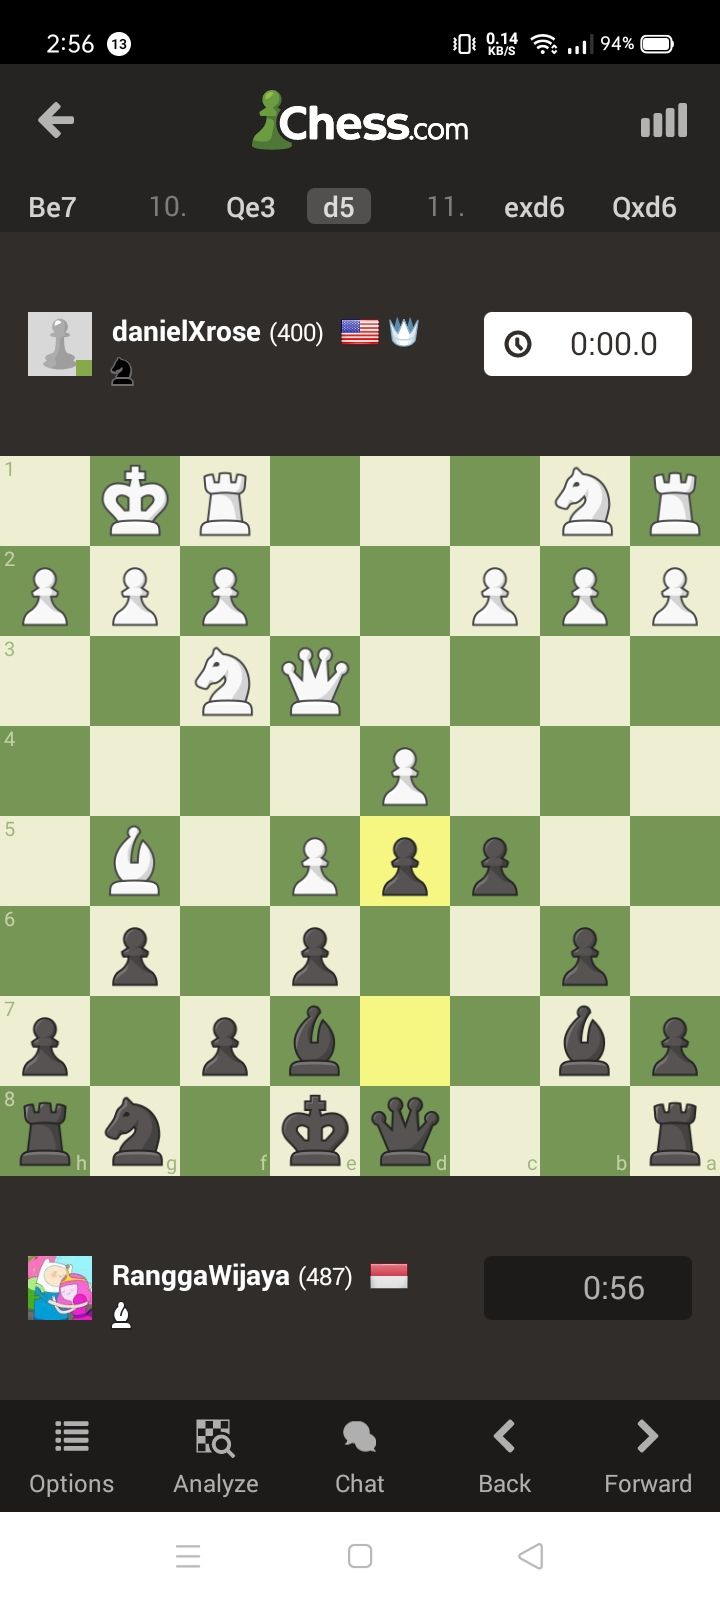 illegal move/ hack? - Chess Forums 